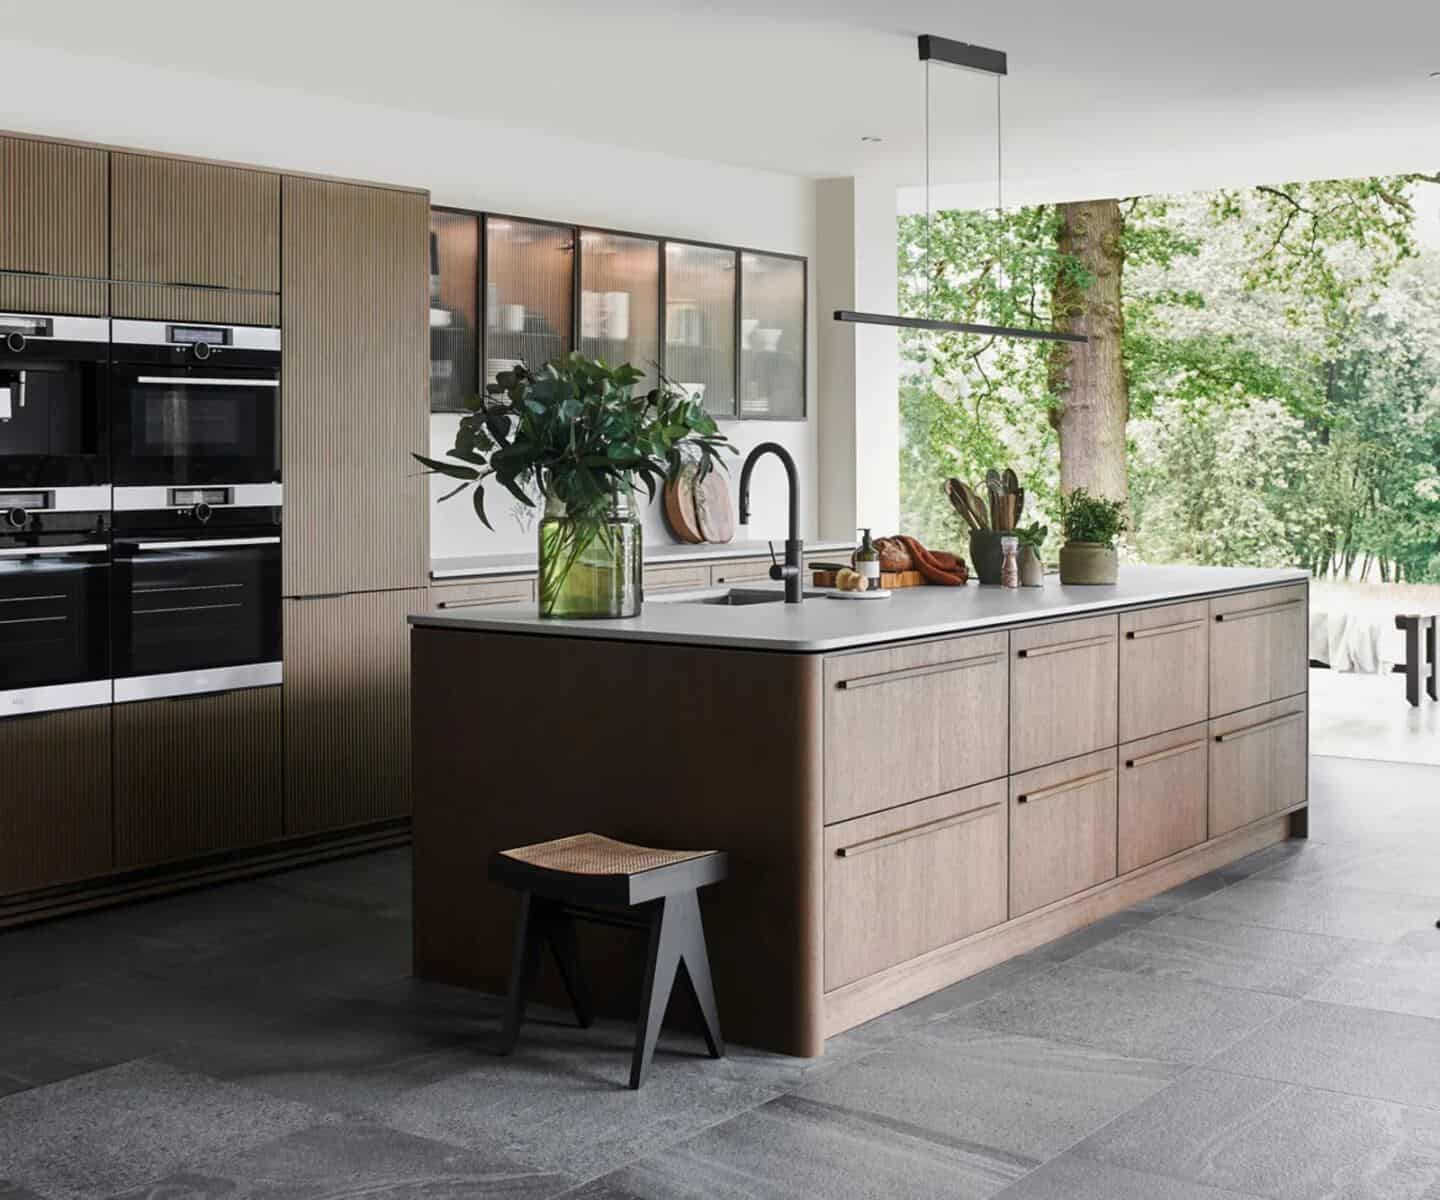 Minimalist kitchen design inspired by nature from Magnet Kitchens